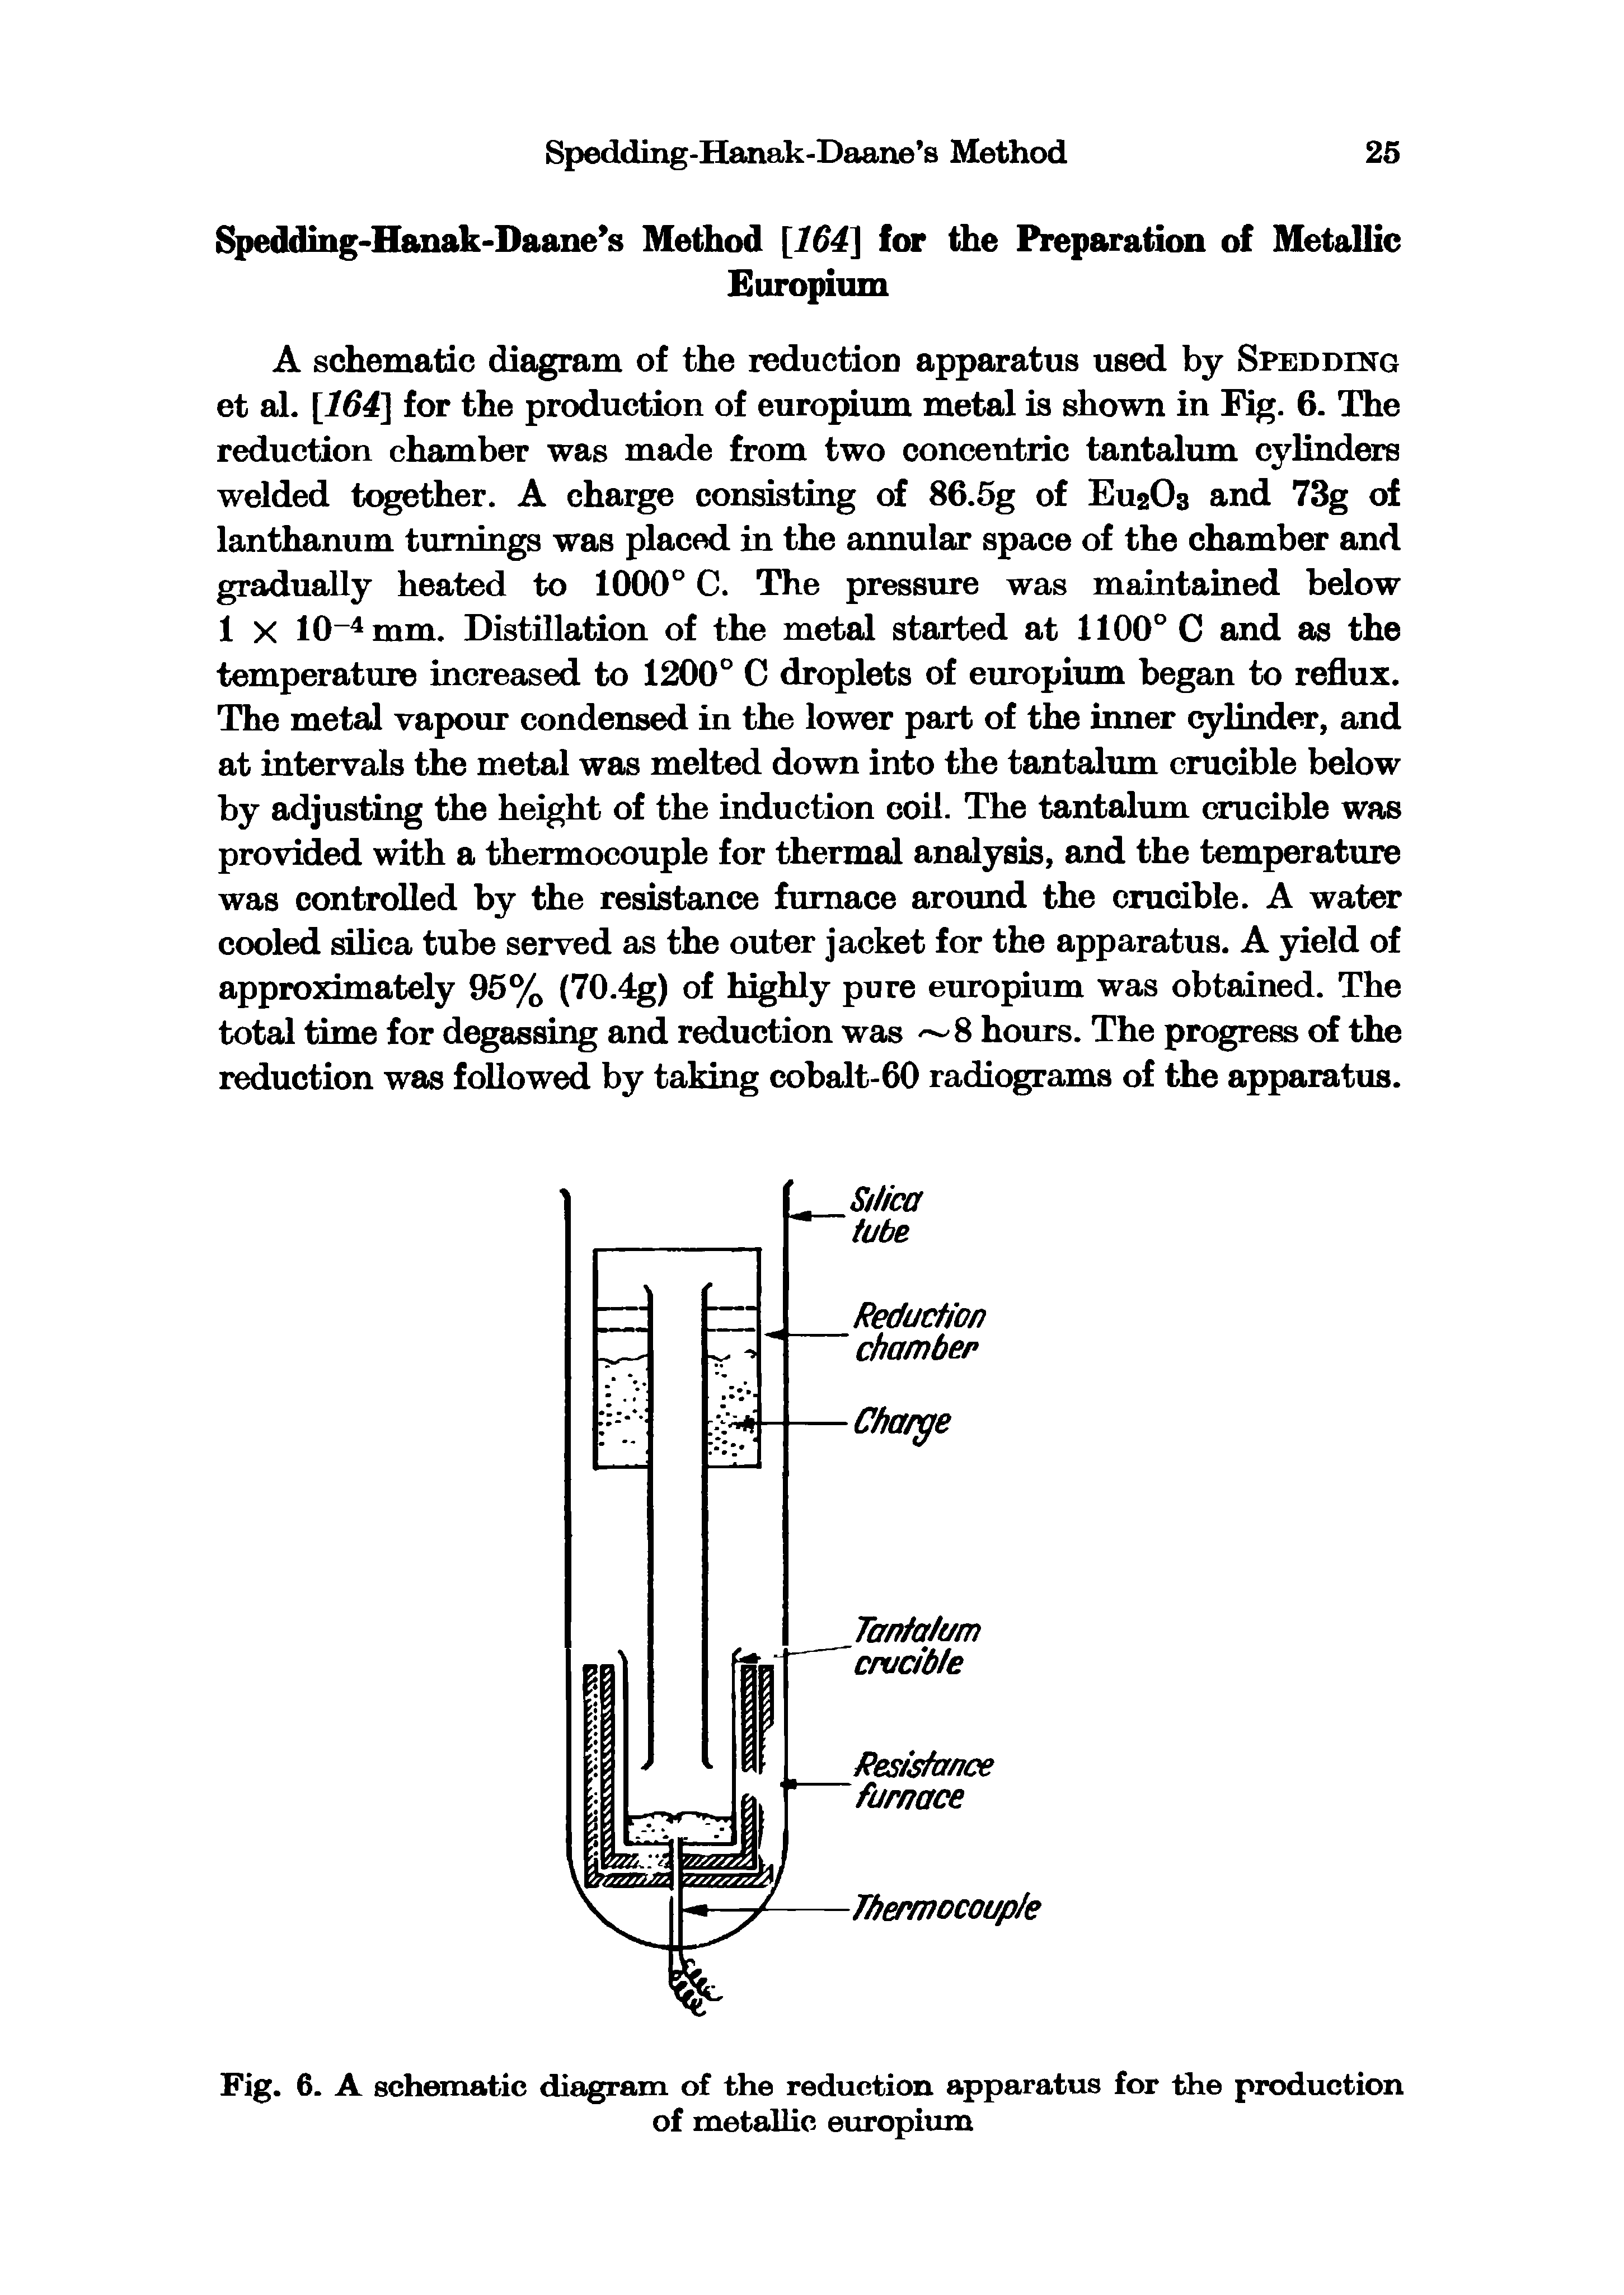 Fig. 6. A schematic diagram of the reduction apparatus for the production of metallic europium...